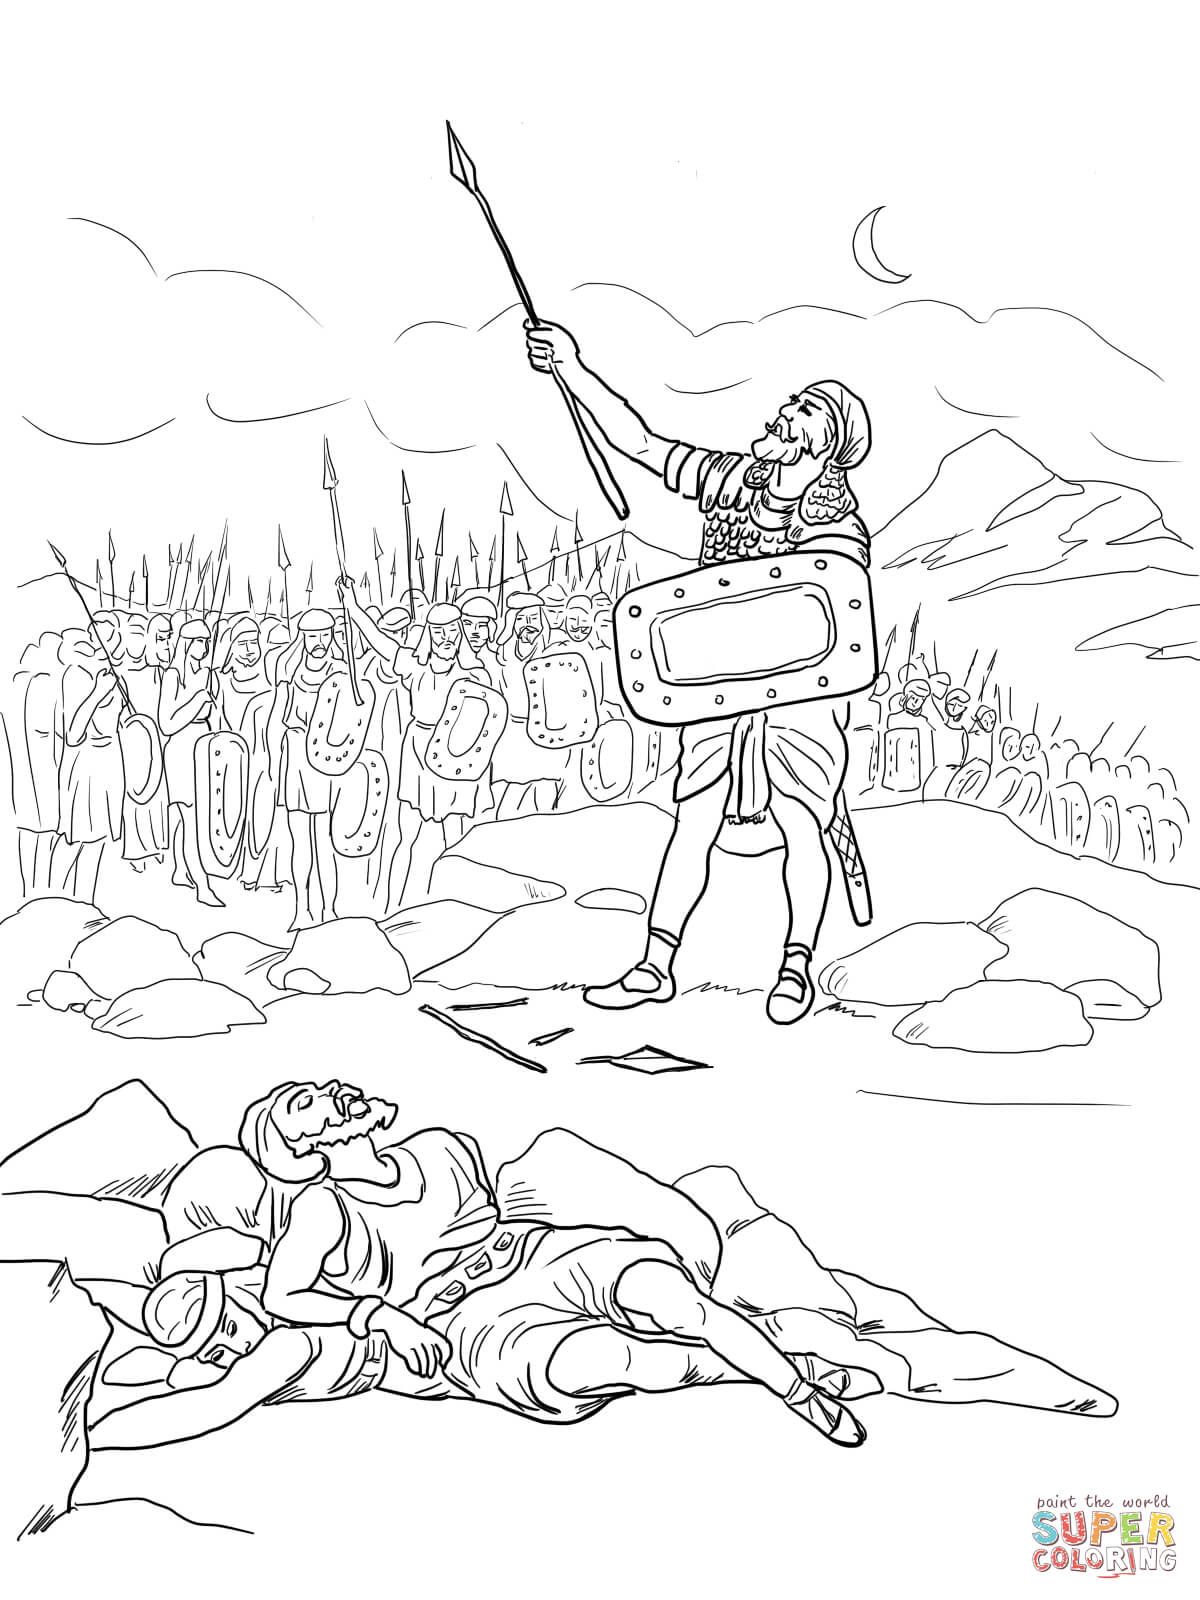 Rahab Helps the Spies coloring page | Free Printable Coloring Pages